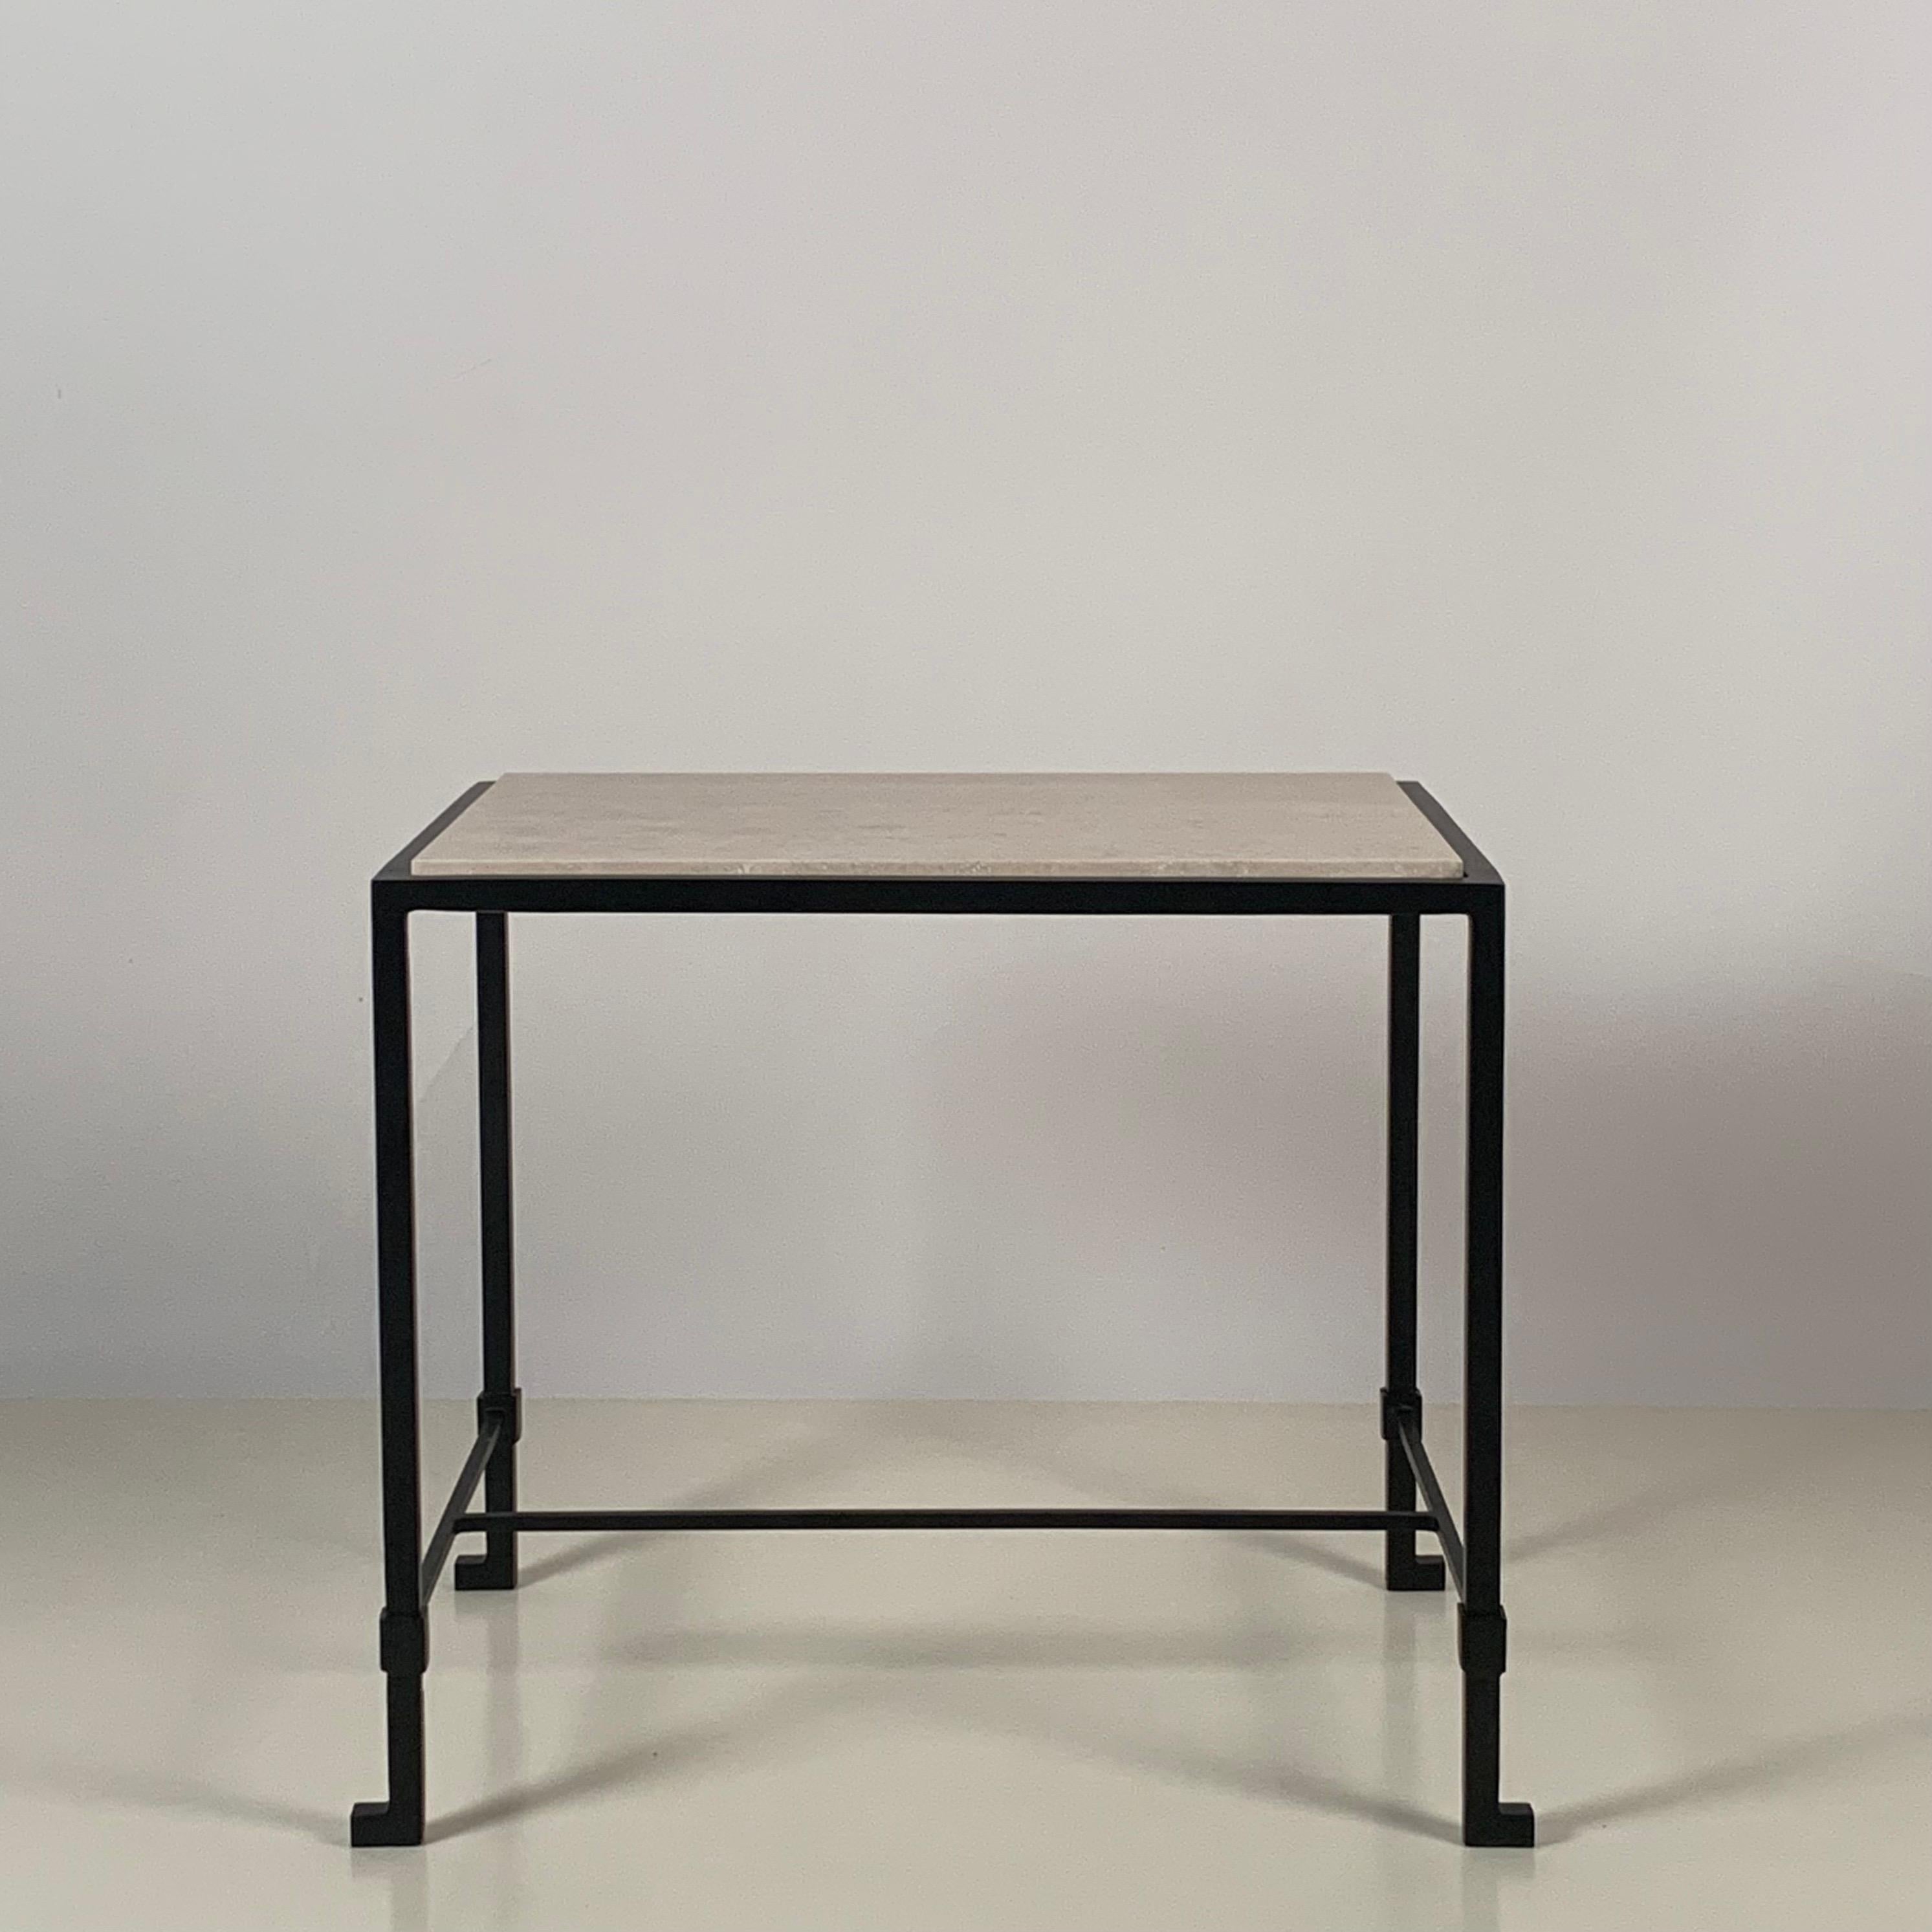 Introducing the 'Diagramme' side or end table by Design Frères, a harmonious blend of timeless elegance and modern sophistication.

The blackened iron base is reminiscent of the iconic Art Deco movement. Its dark finish exudes sophistication and